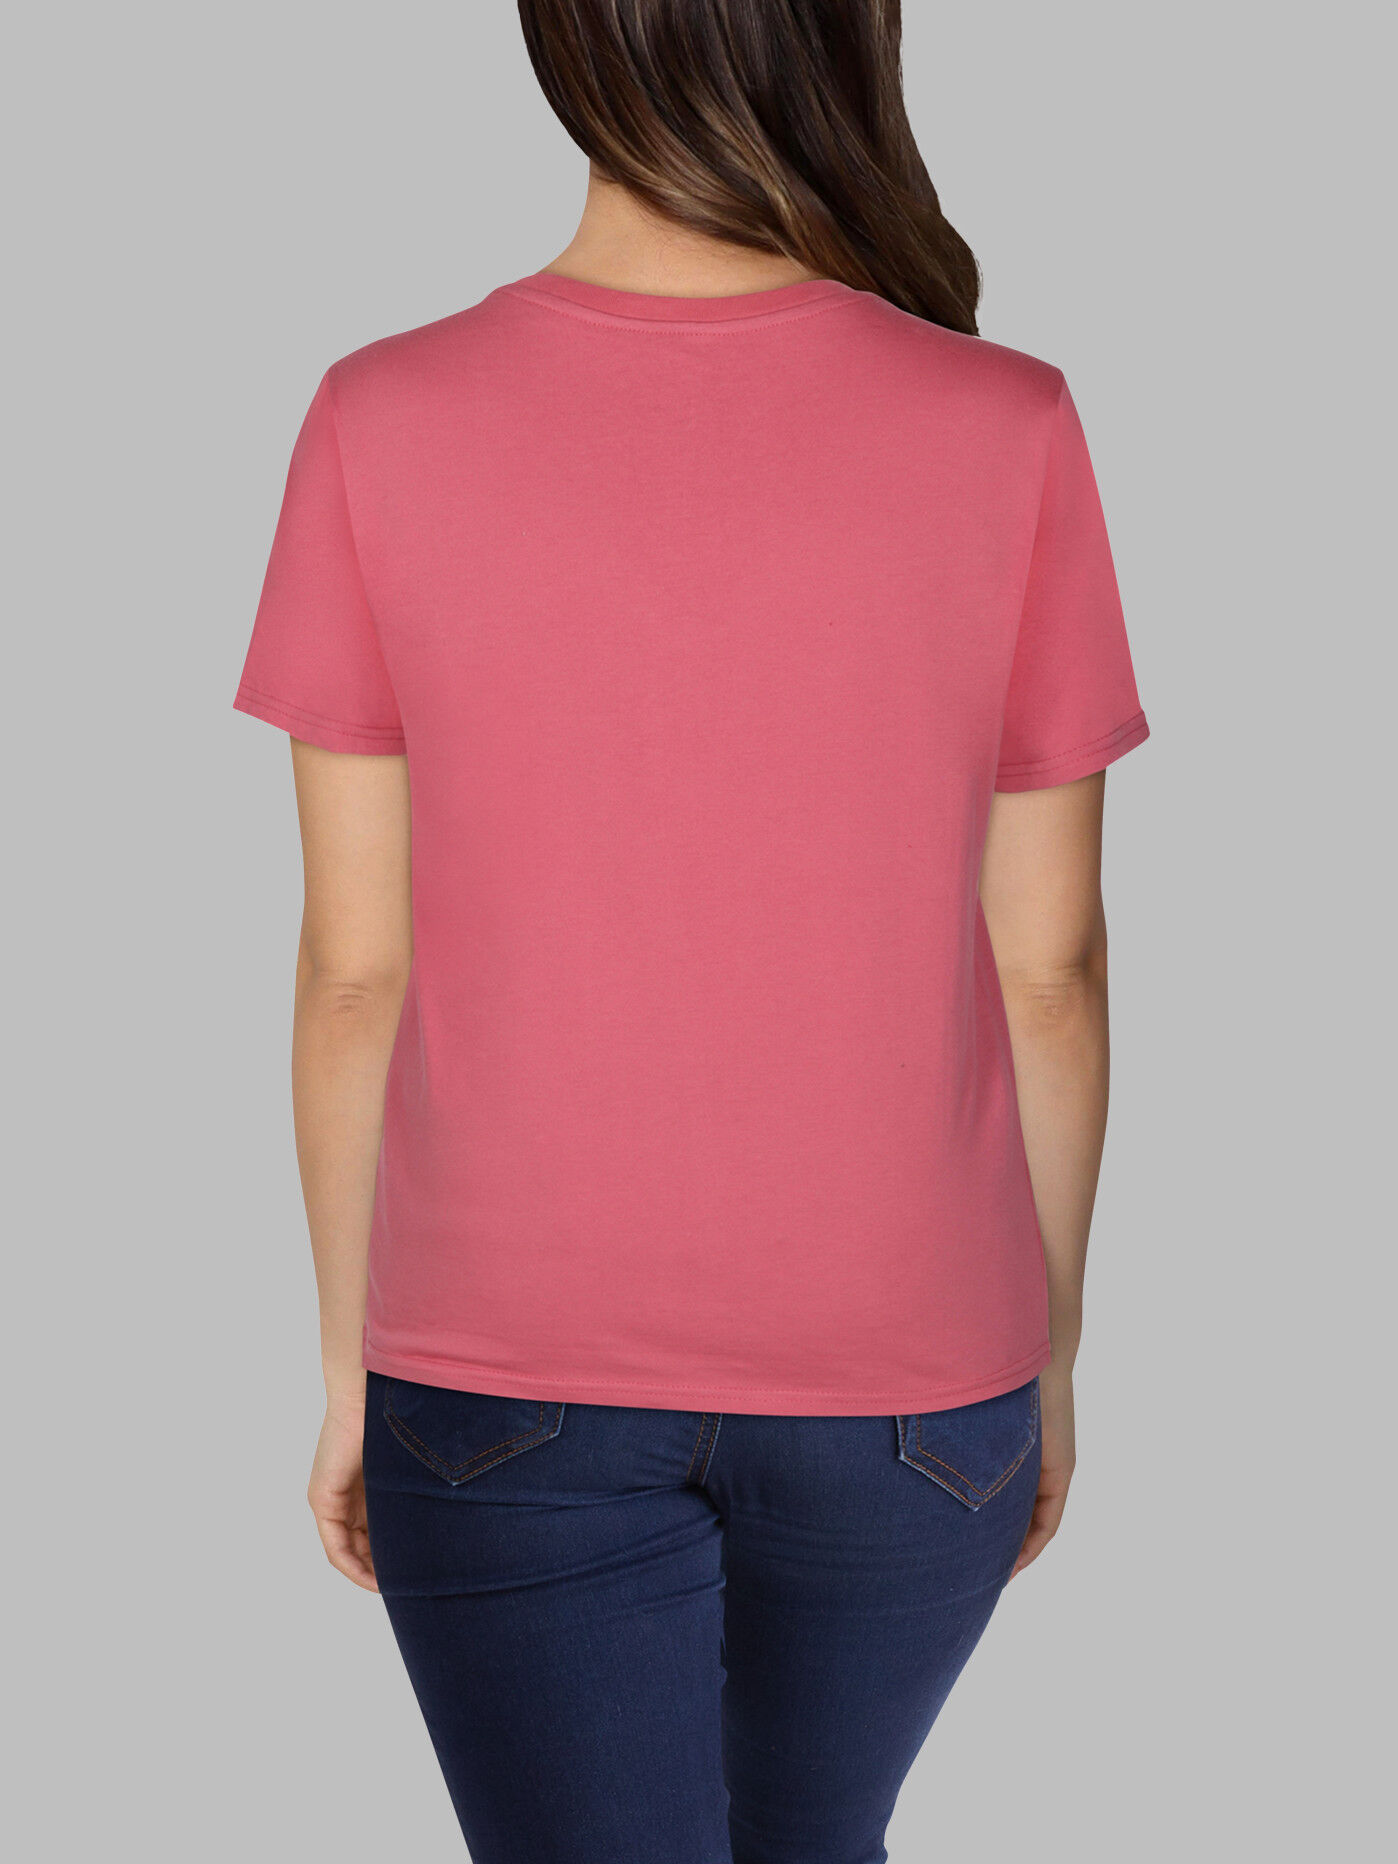 Women's Crafted Comfort V-Neck T-Shirt | Fruit of the Loom